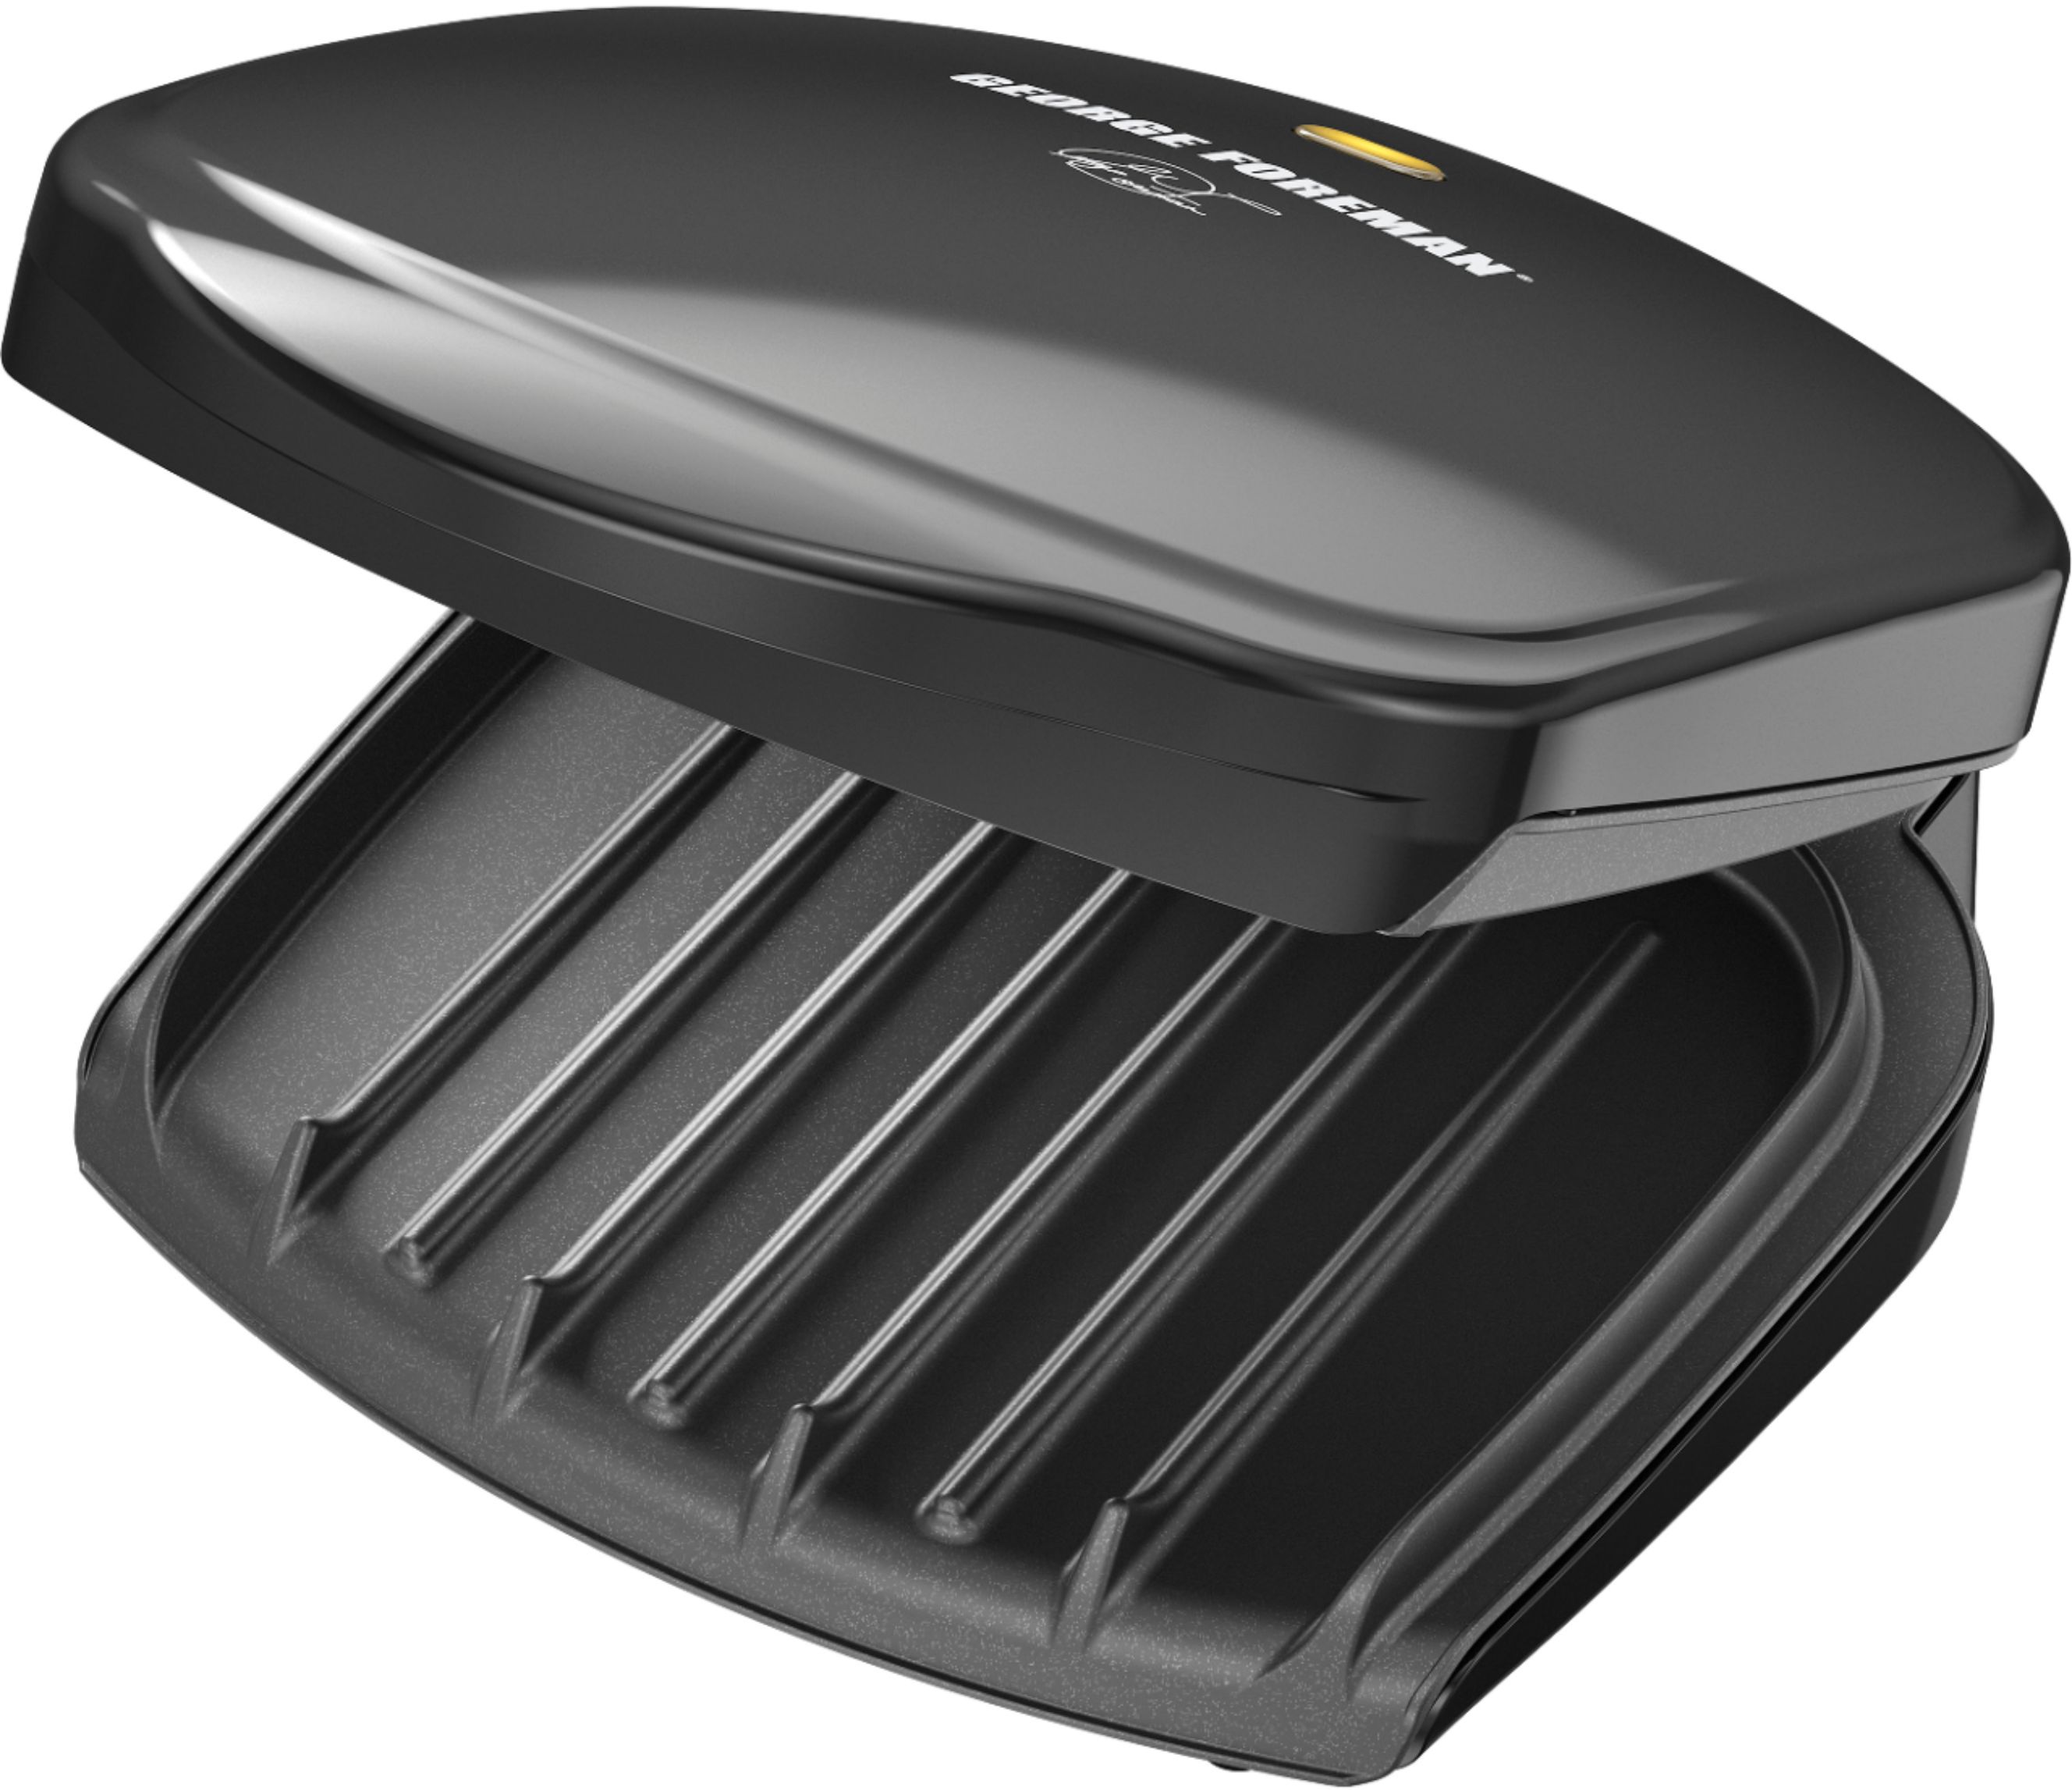 George Foreman Two Portion Compact Grill 220 240 volts - Black (18840-00)